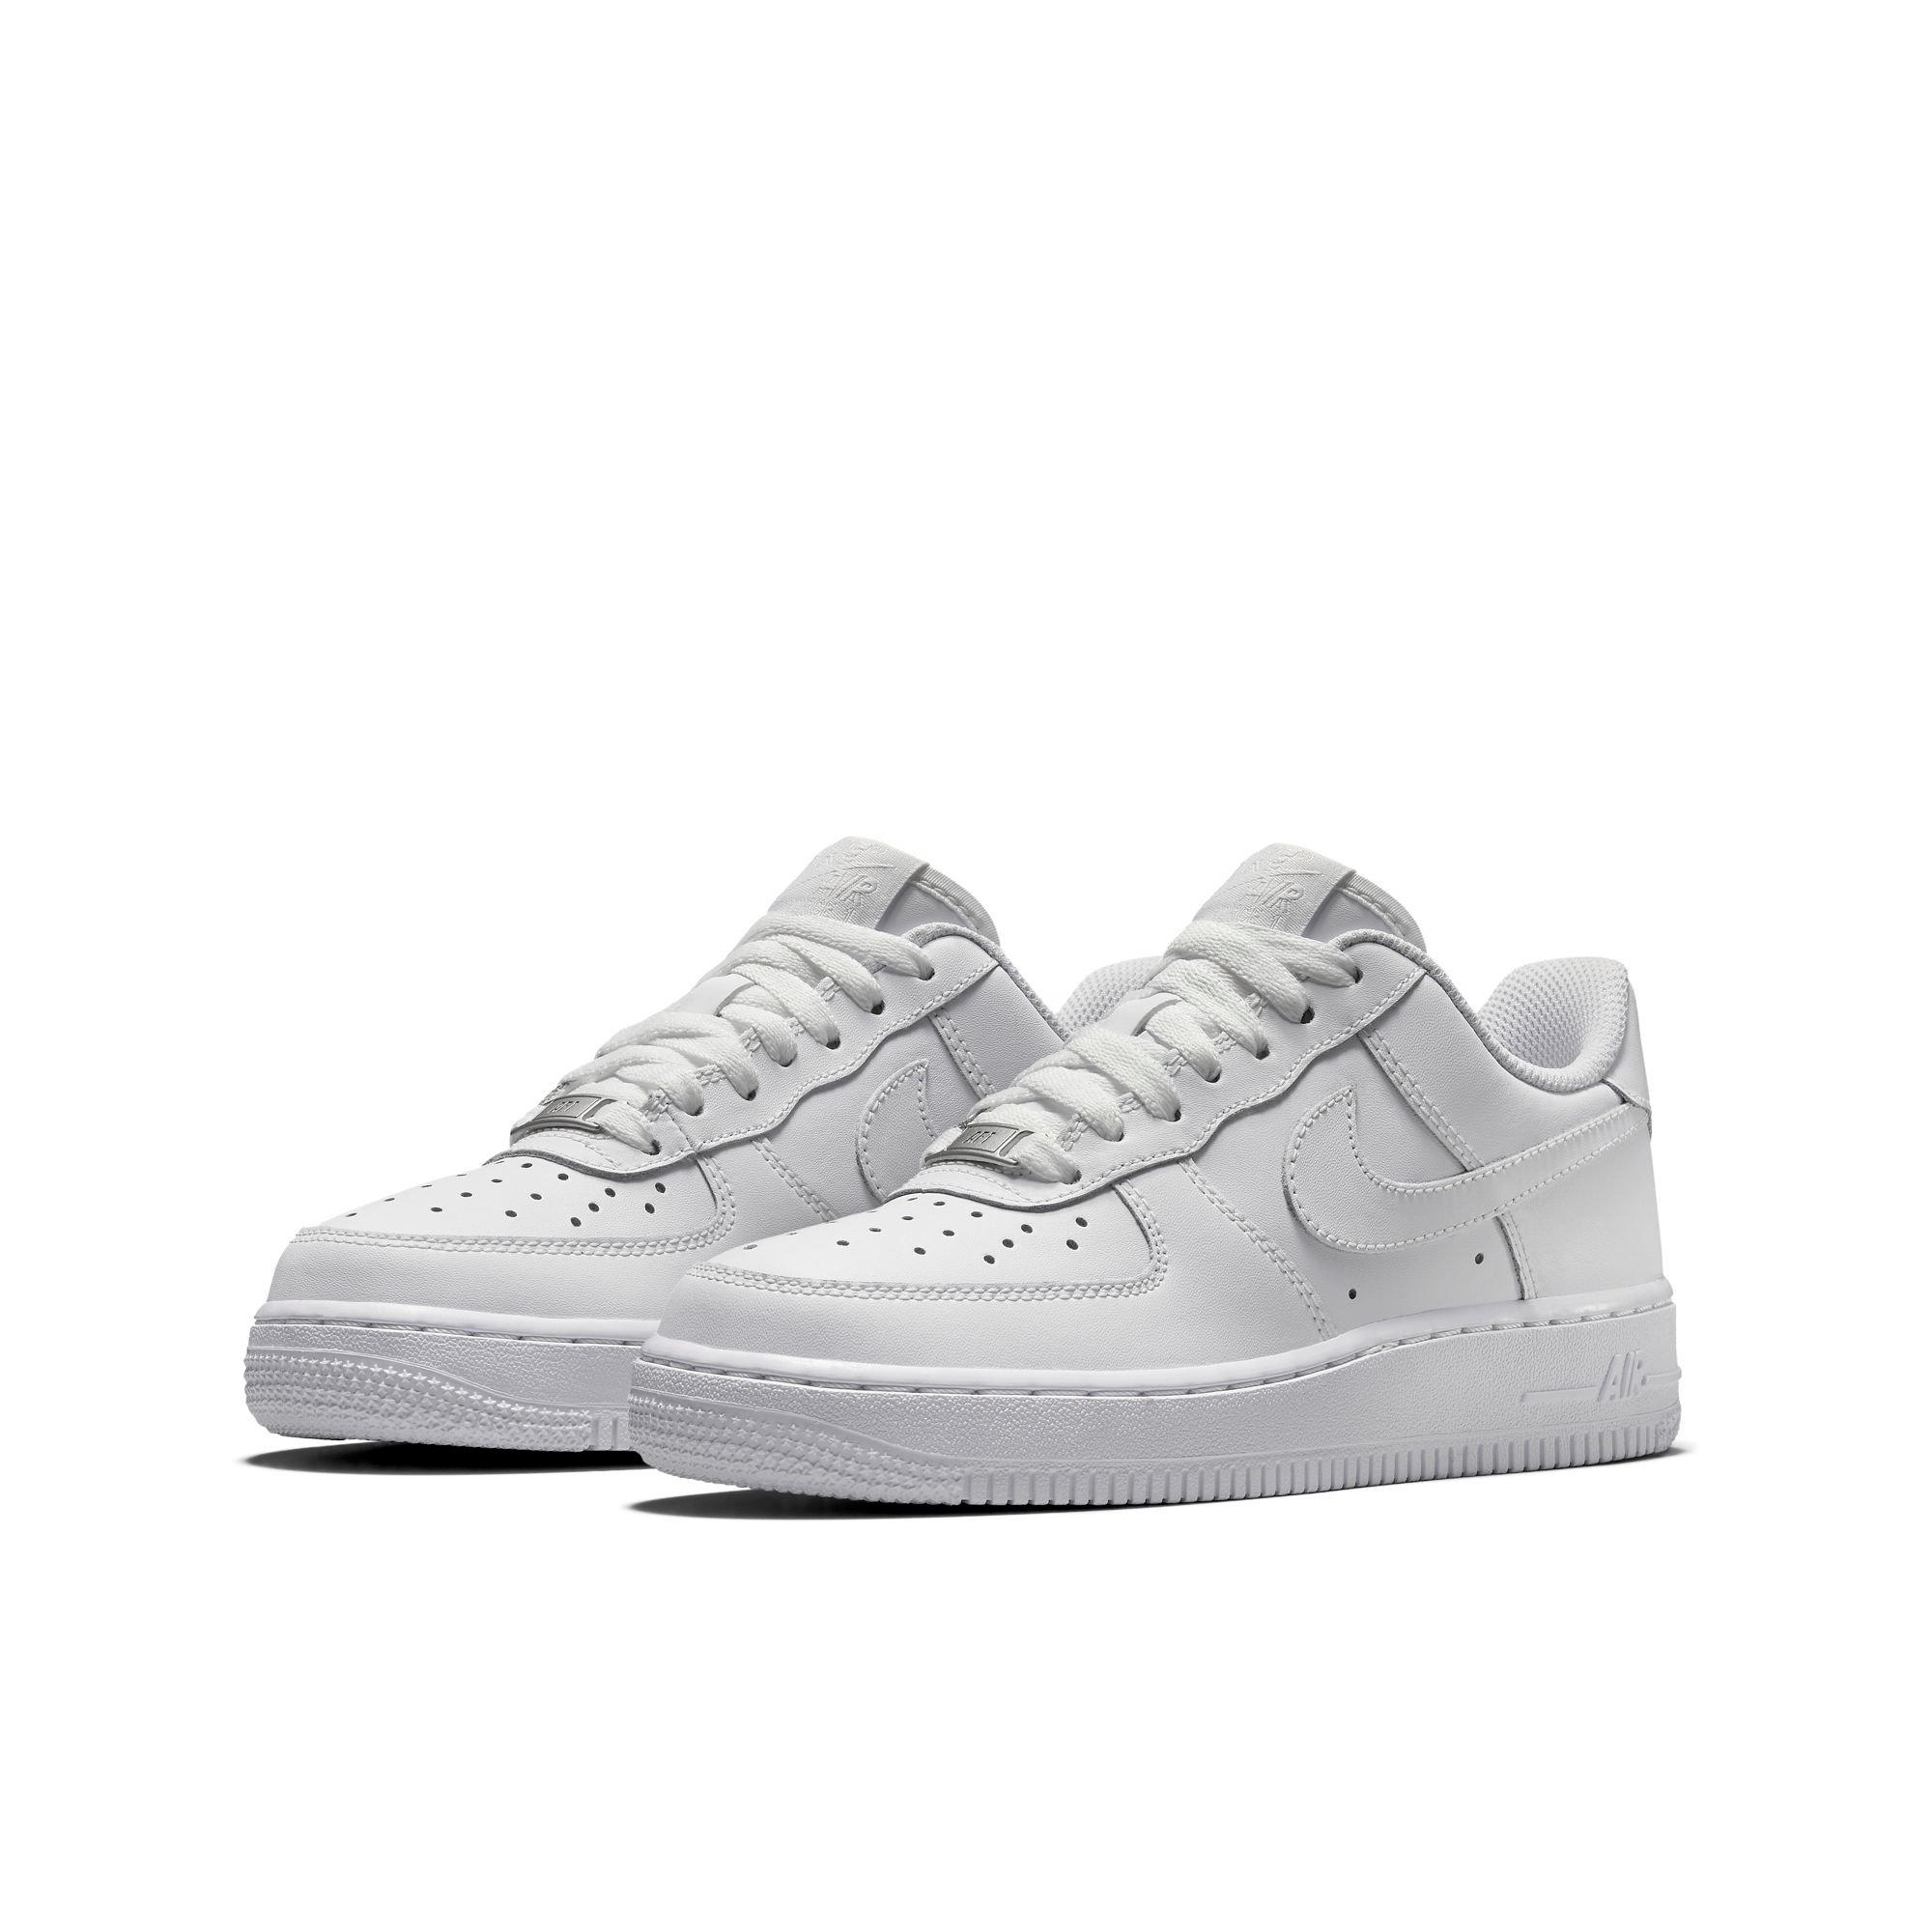 white air force 1 grade school size 5